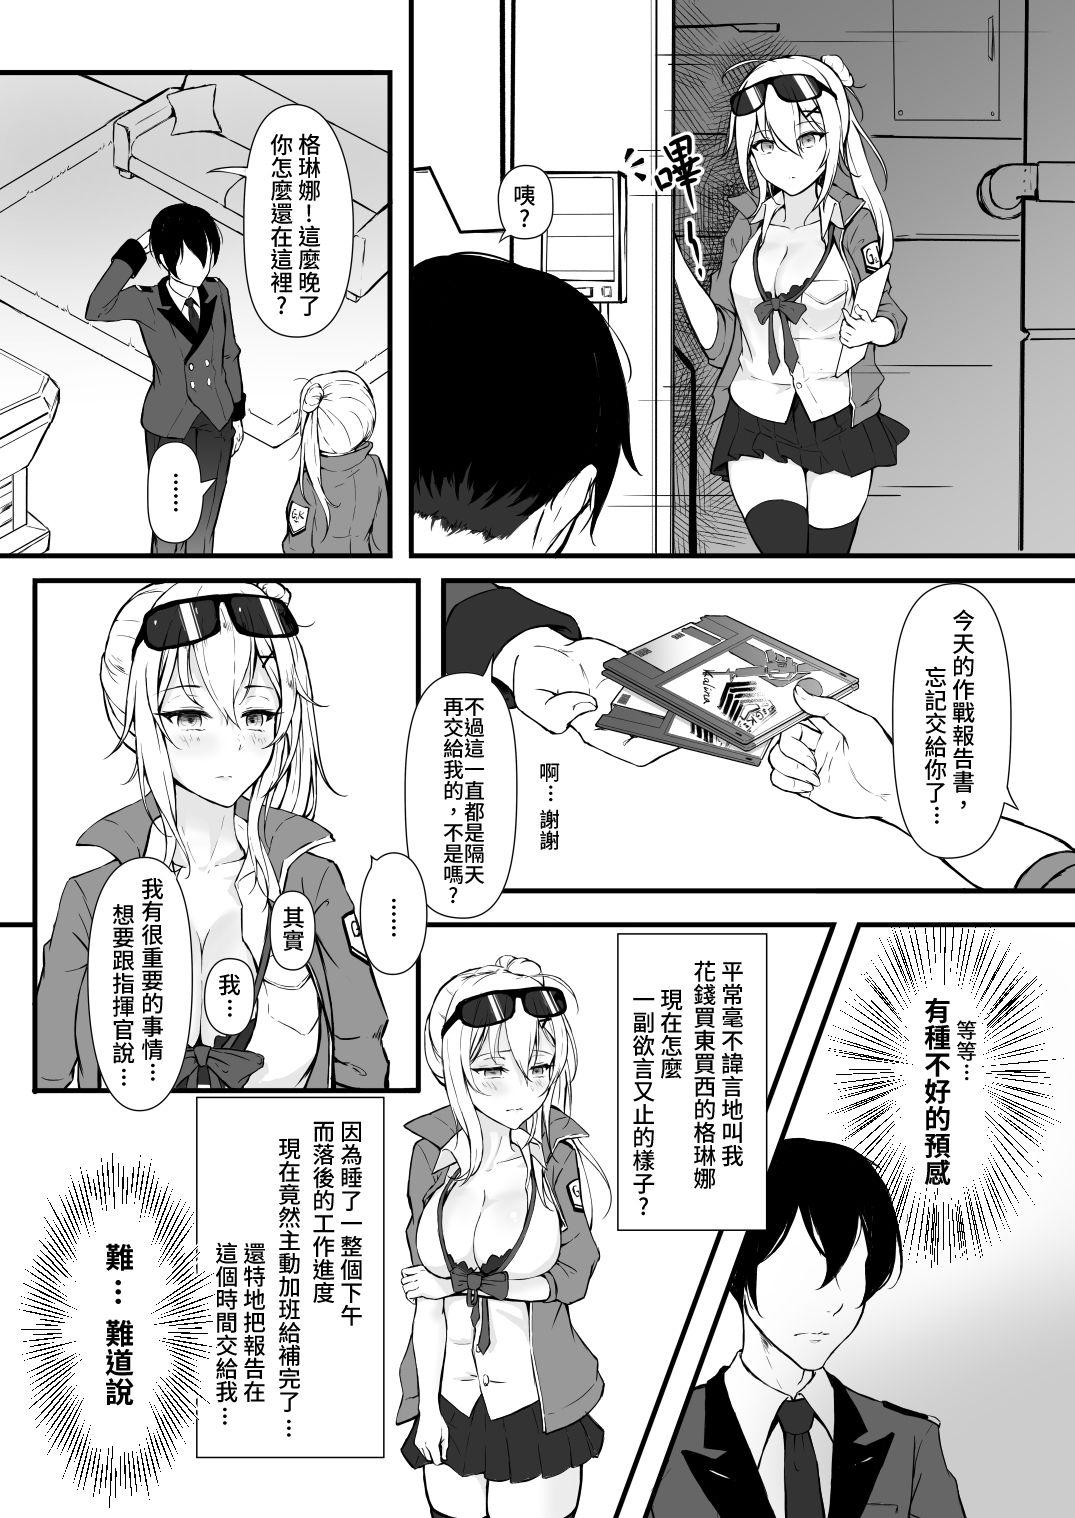 Natural Boobs How Many Diamonds a Kiss Worth? - Girls frontline Exposed - Page 7